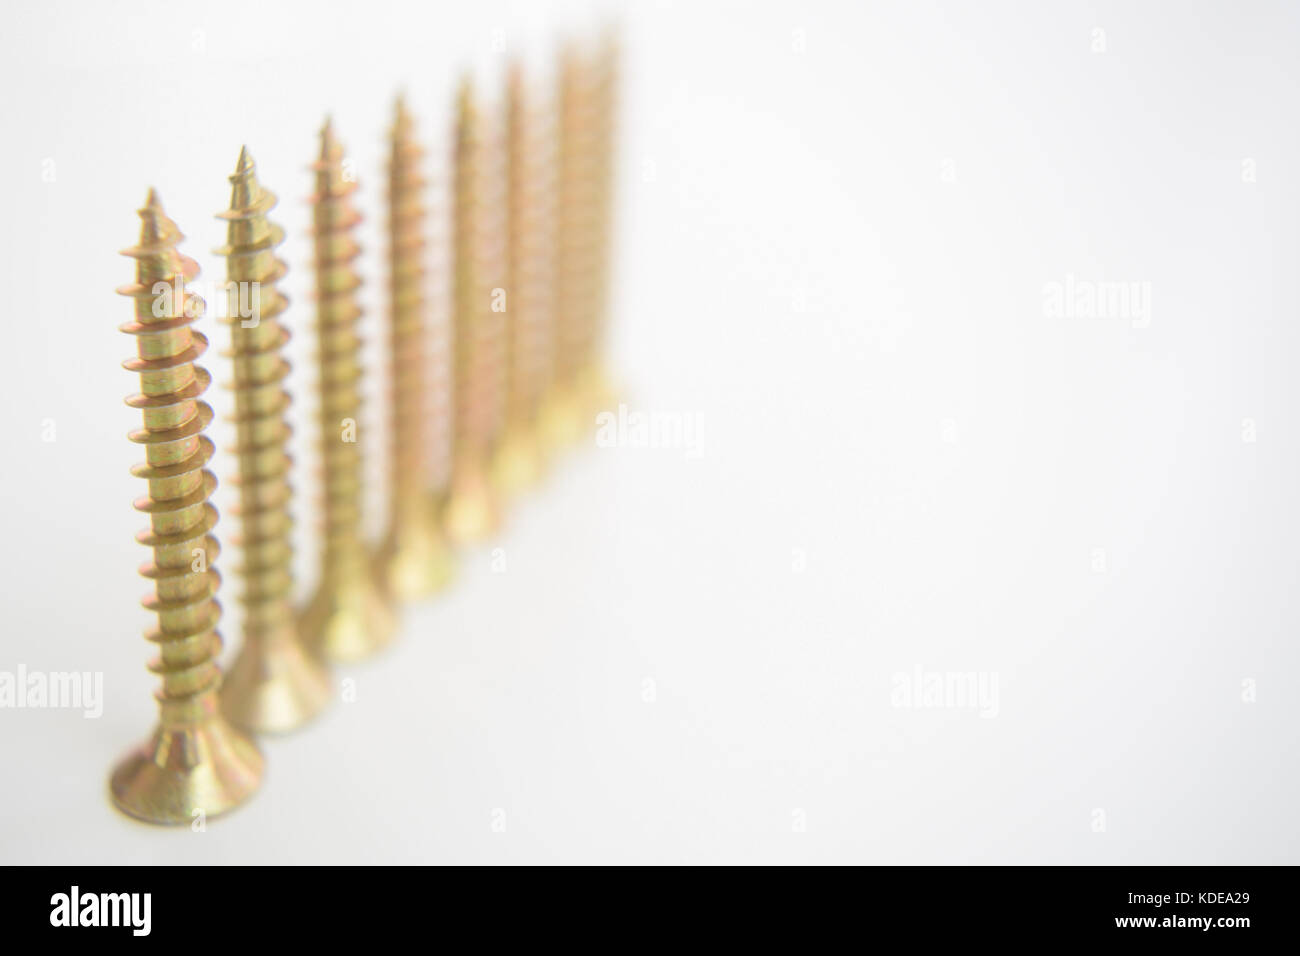 Lines of brass screws on a white background. Organised Stock Photo